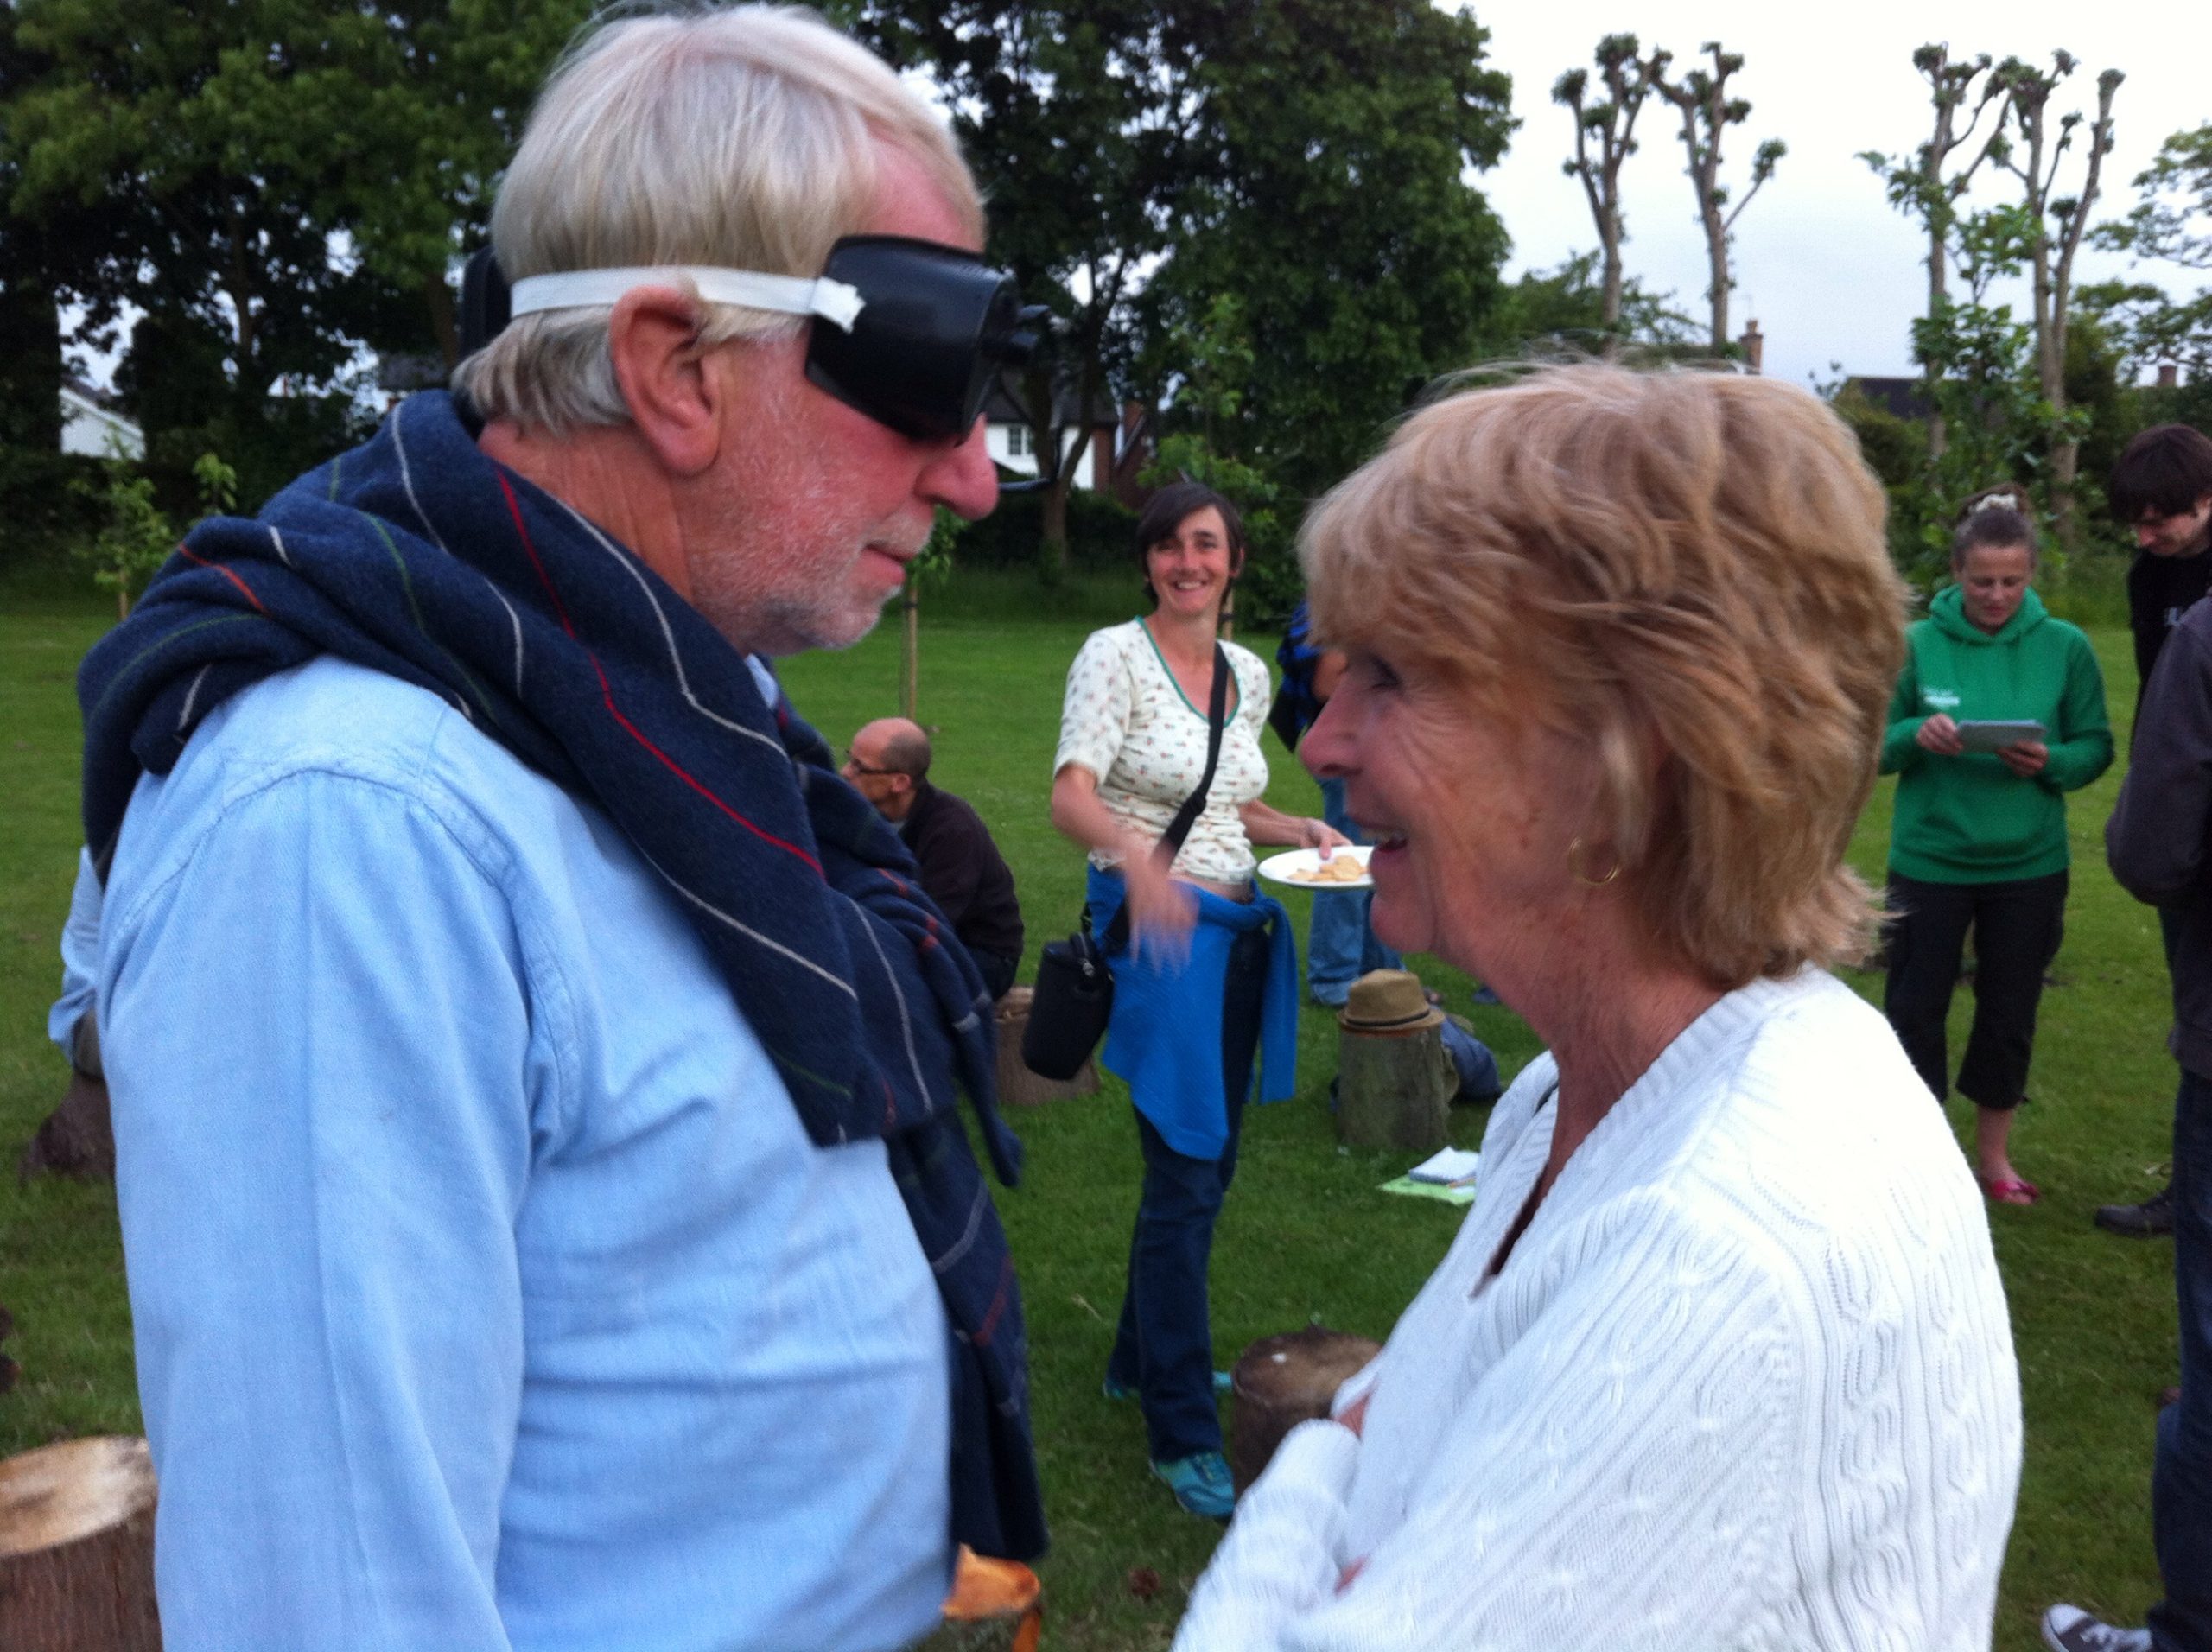 A man and woman standing opposite each other. The man is wearing blacked out goggles.